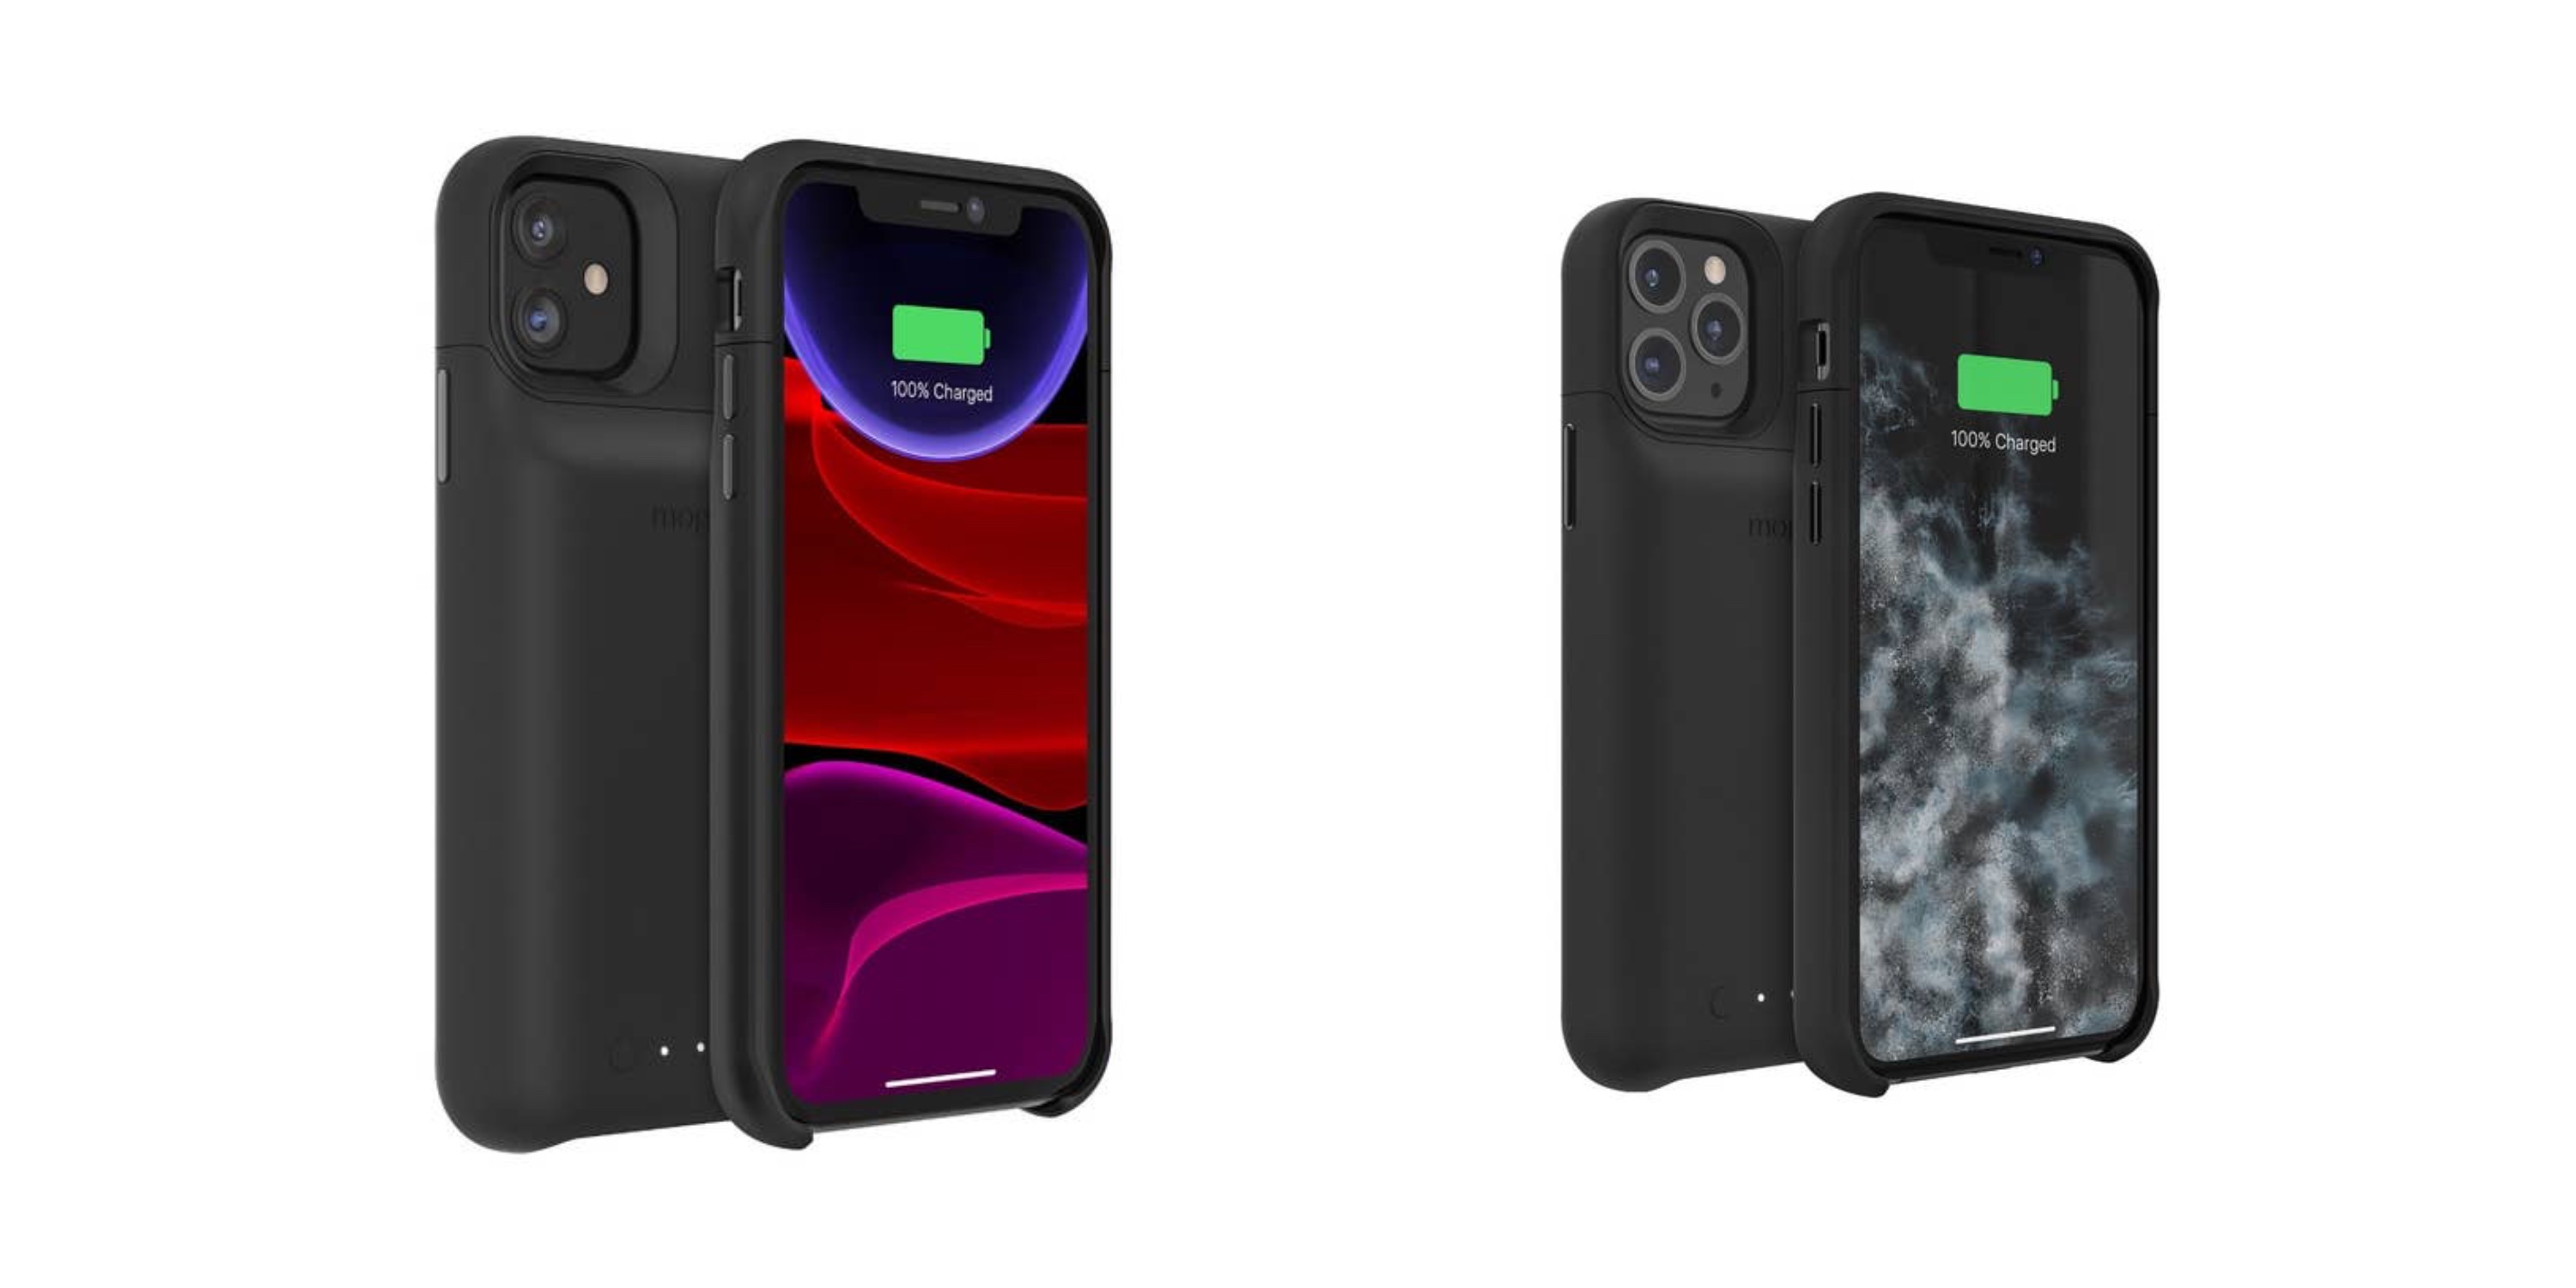 mophie Juice Pack Access iPhone XS MAX Charging Case *Black*